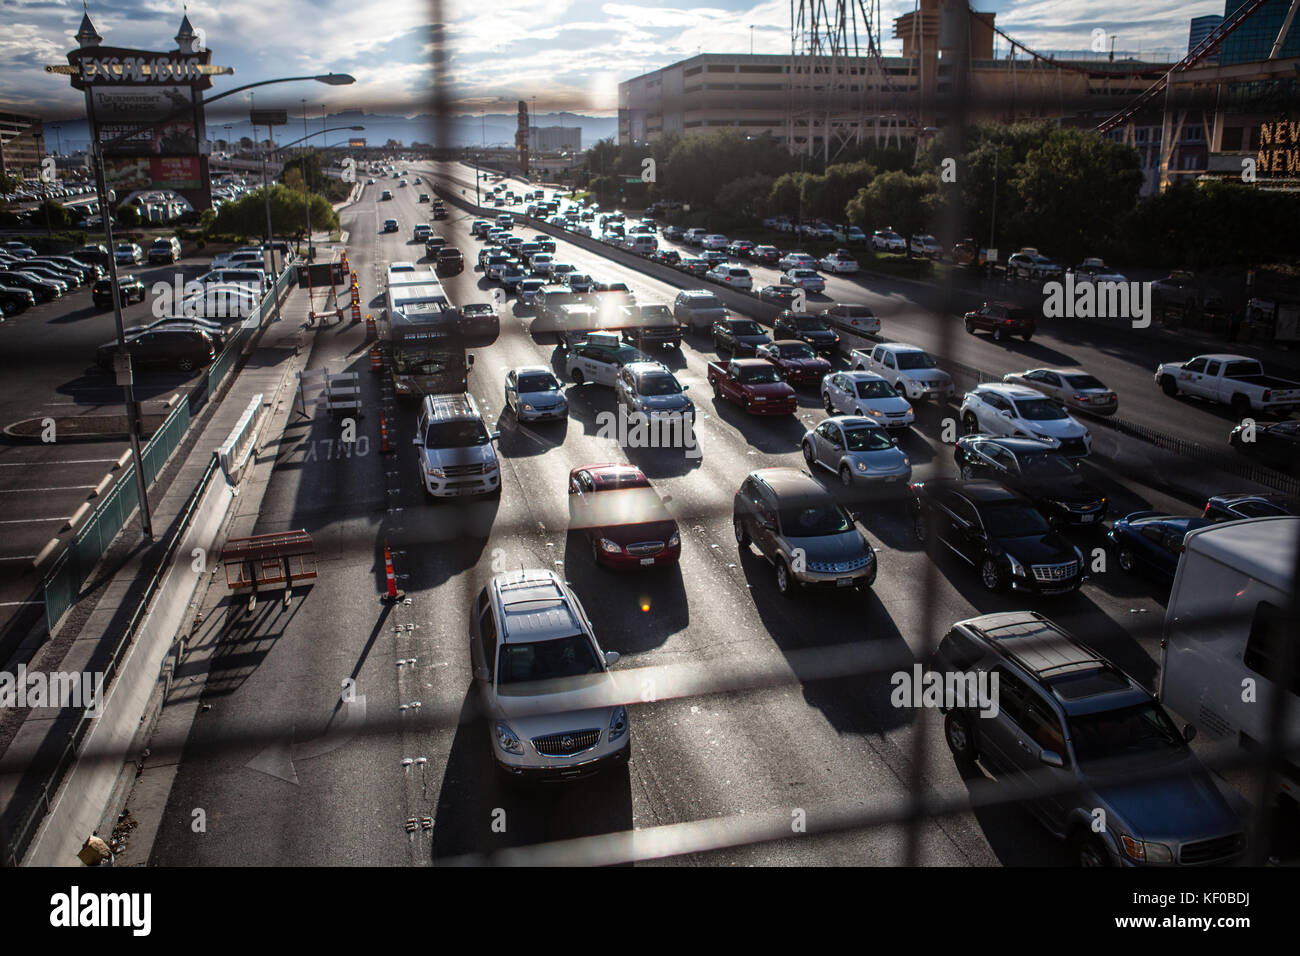 Looking down on a crowded highway from a footbridge in Las Vegas where the  traffic jam has brought cars and vehciles to a stand still Stock Photo -  Alamy